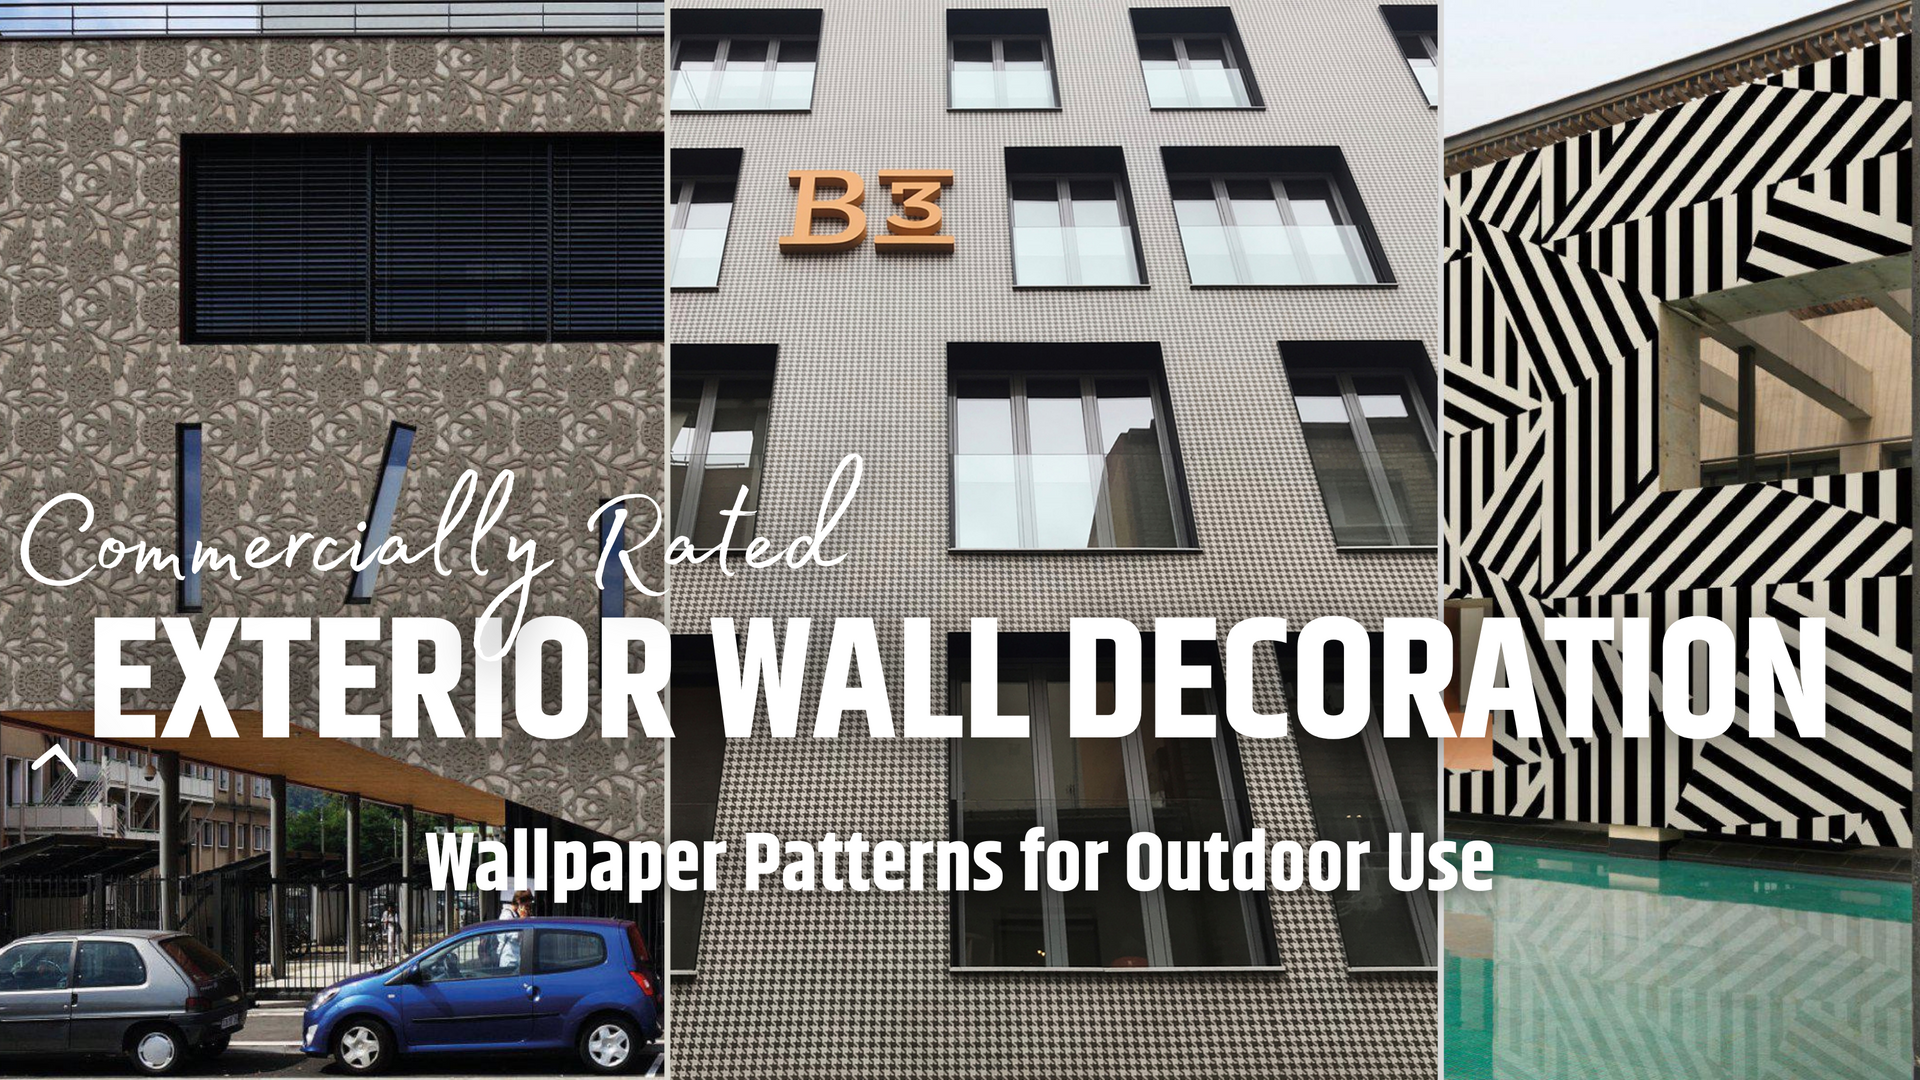 Blogs that Dig a Little Deeper into Products & Technical Details-Decorating Exterior Walls (+ technical information & video)-modernwallpaper.io